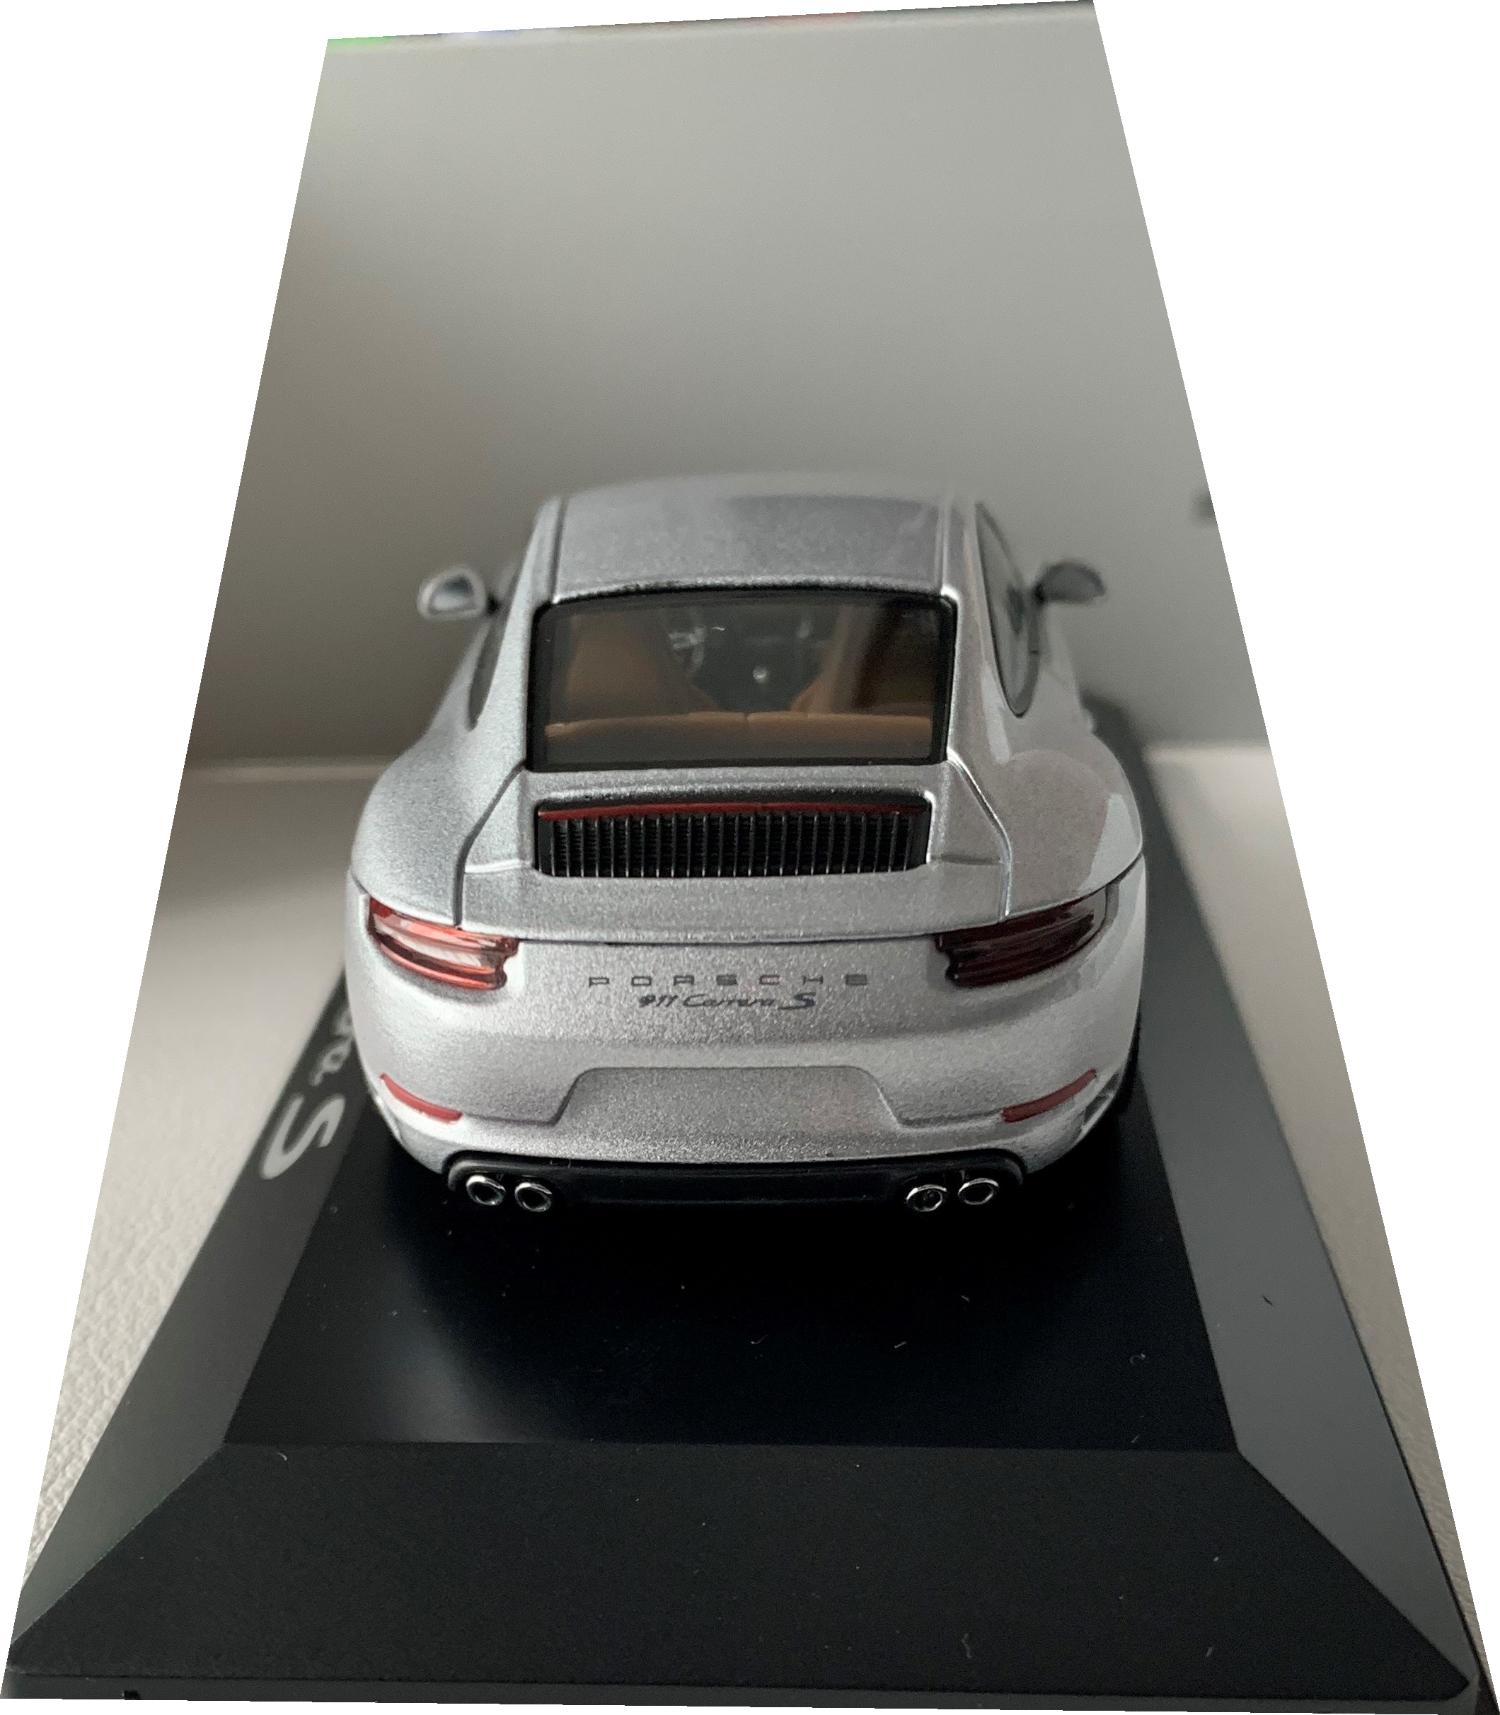 An excellent reproduction of the Porsche 911 Carrera S Coupe with detail throughout, all authentically recreated. Model is mounted on a removable plinth with a removable hard plastic cover and presented in Porsche packaging